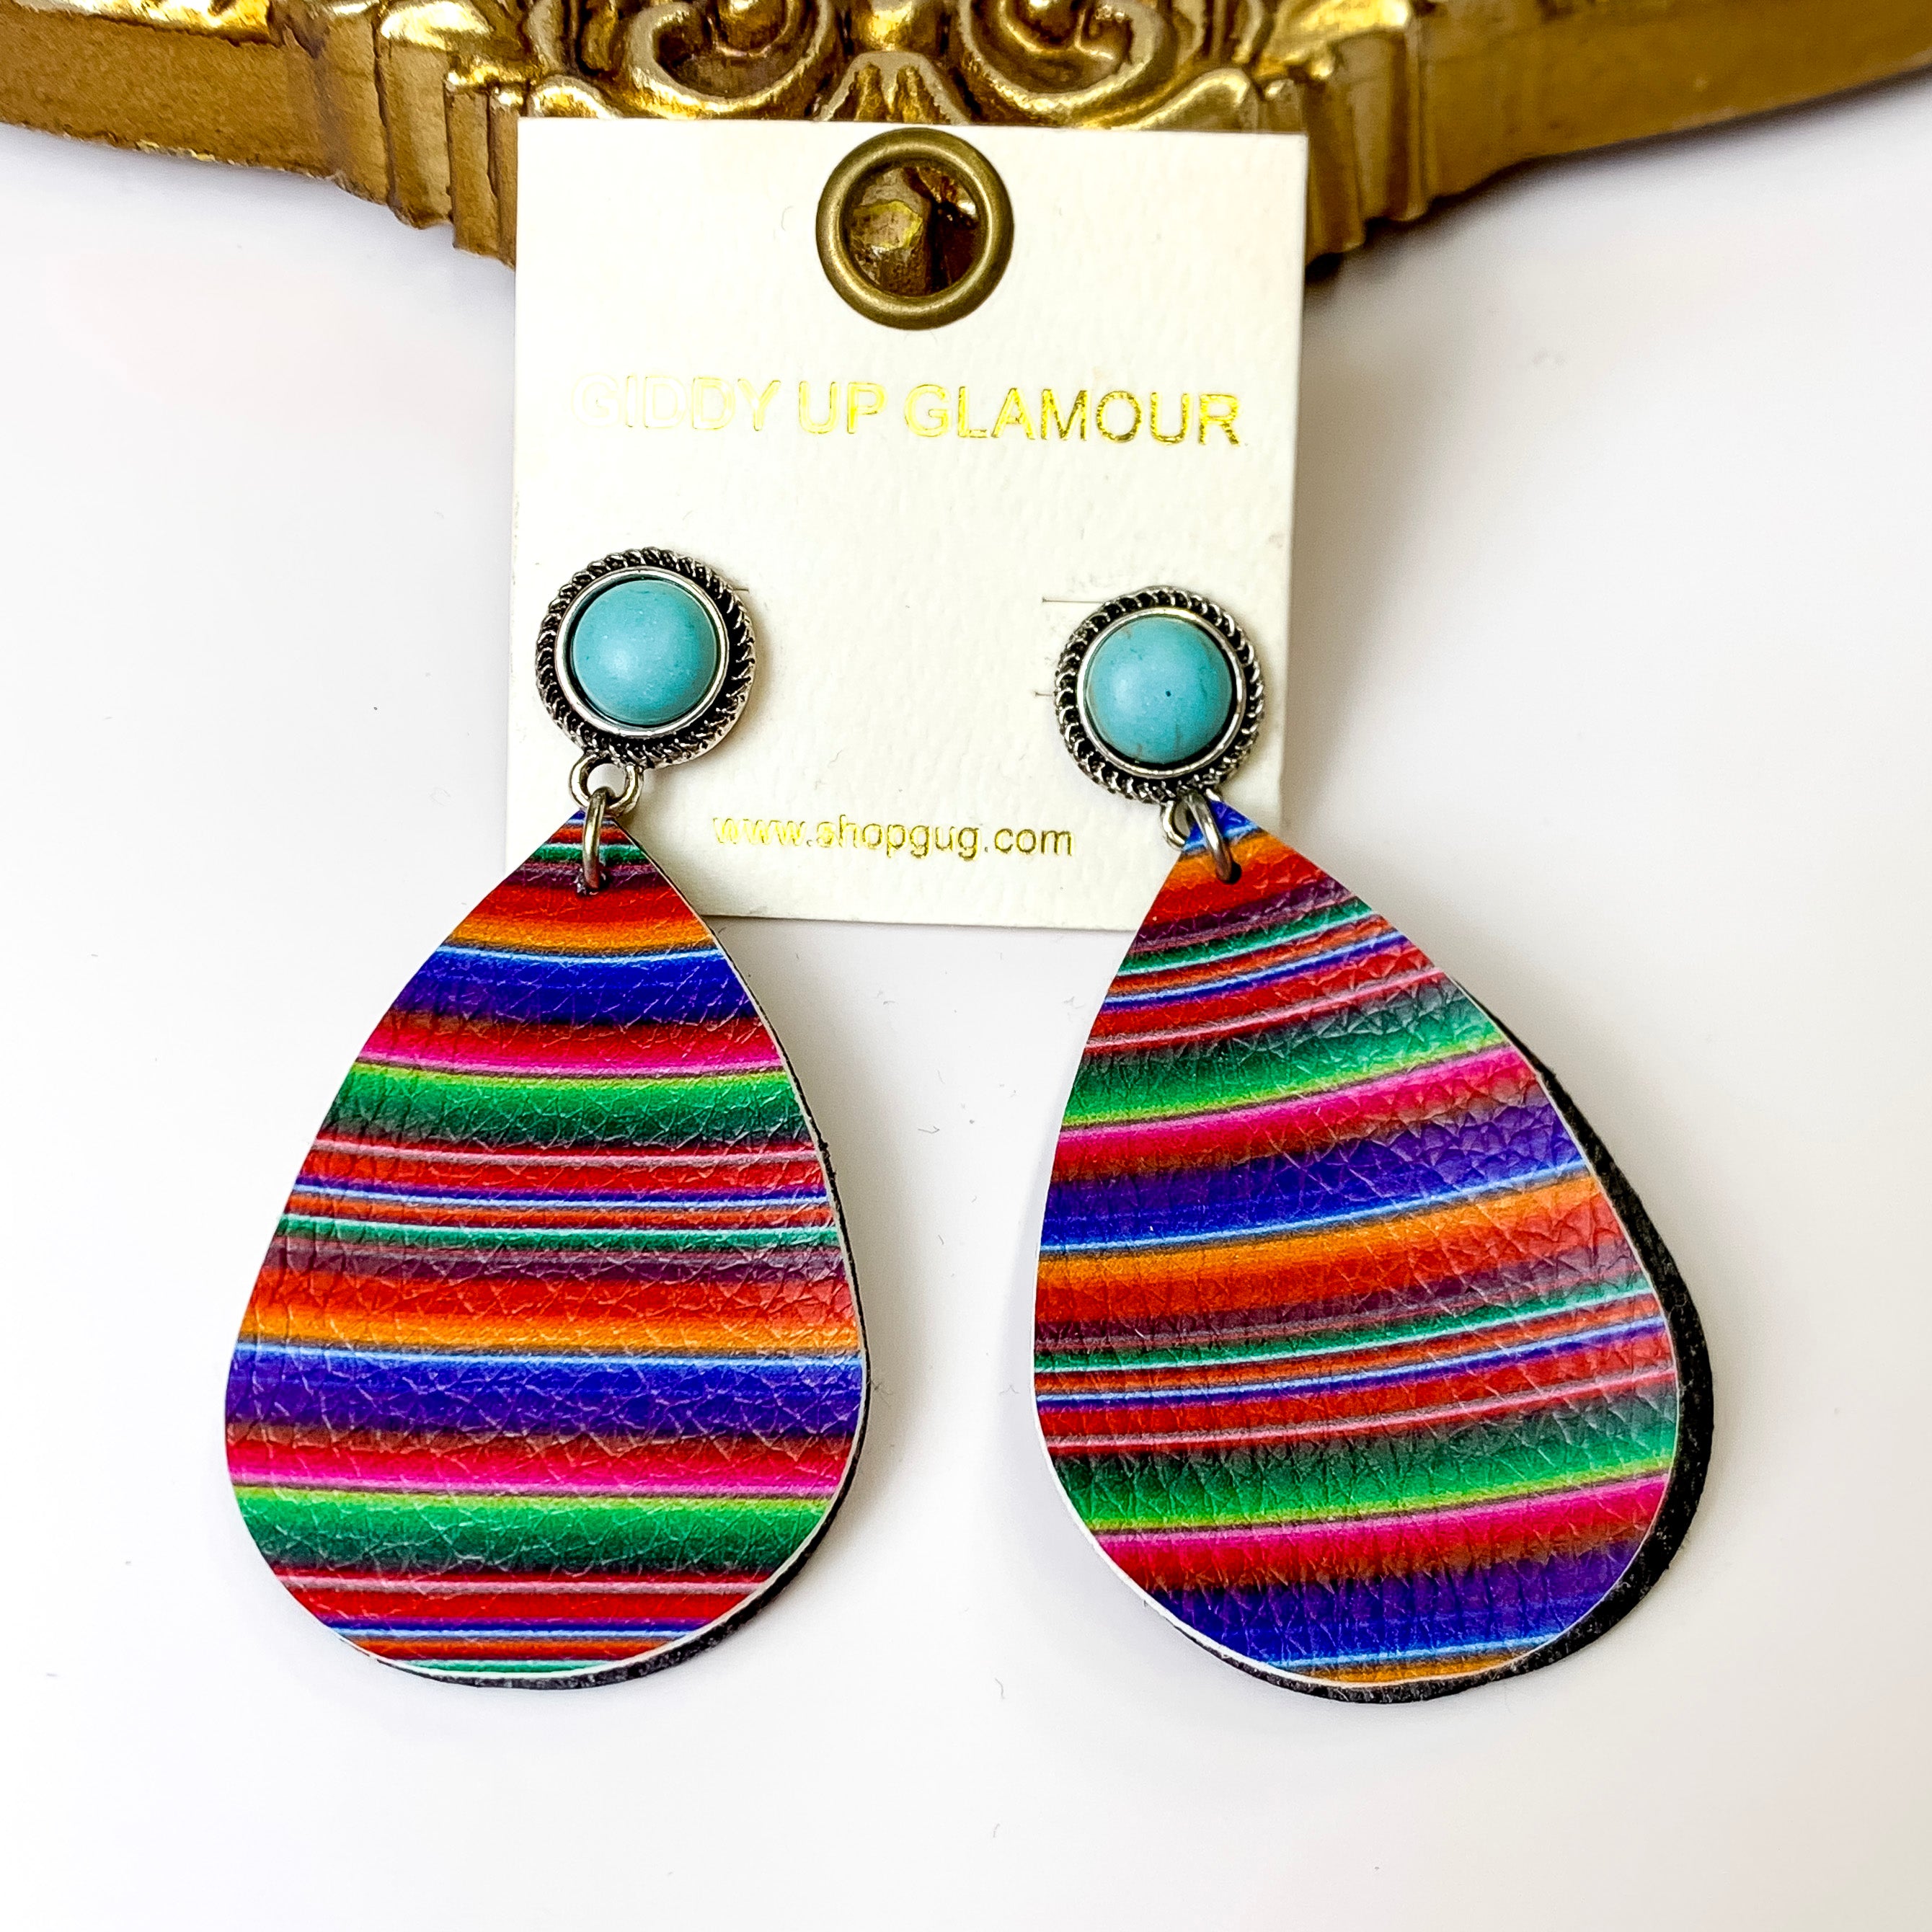 Stone Post Faux Leather Serape Print Teardrop Earrings - Giddy Up Glamour Boutique